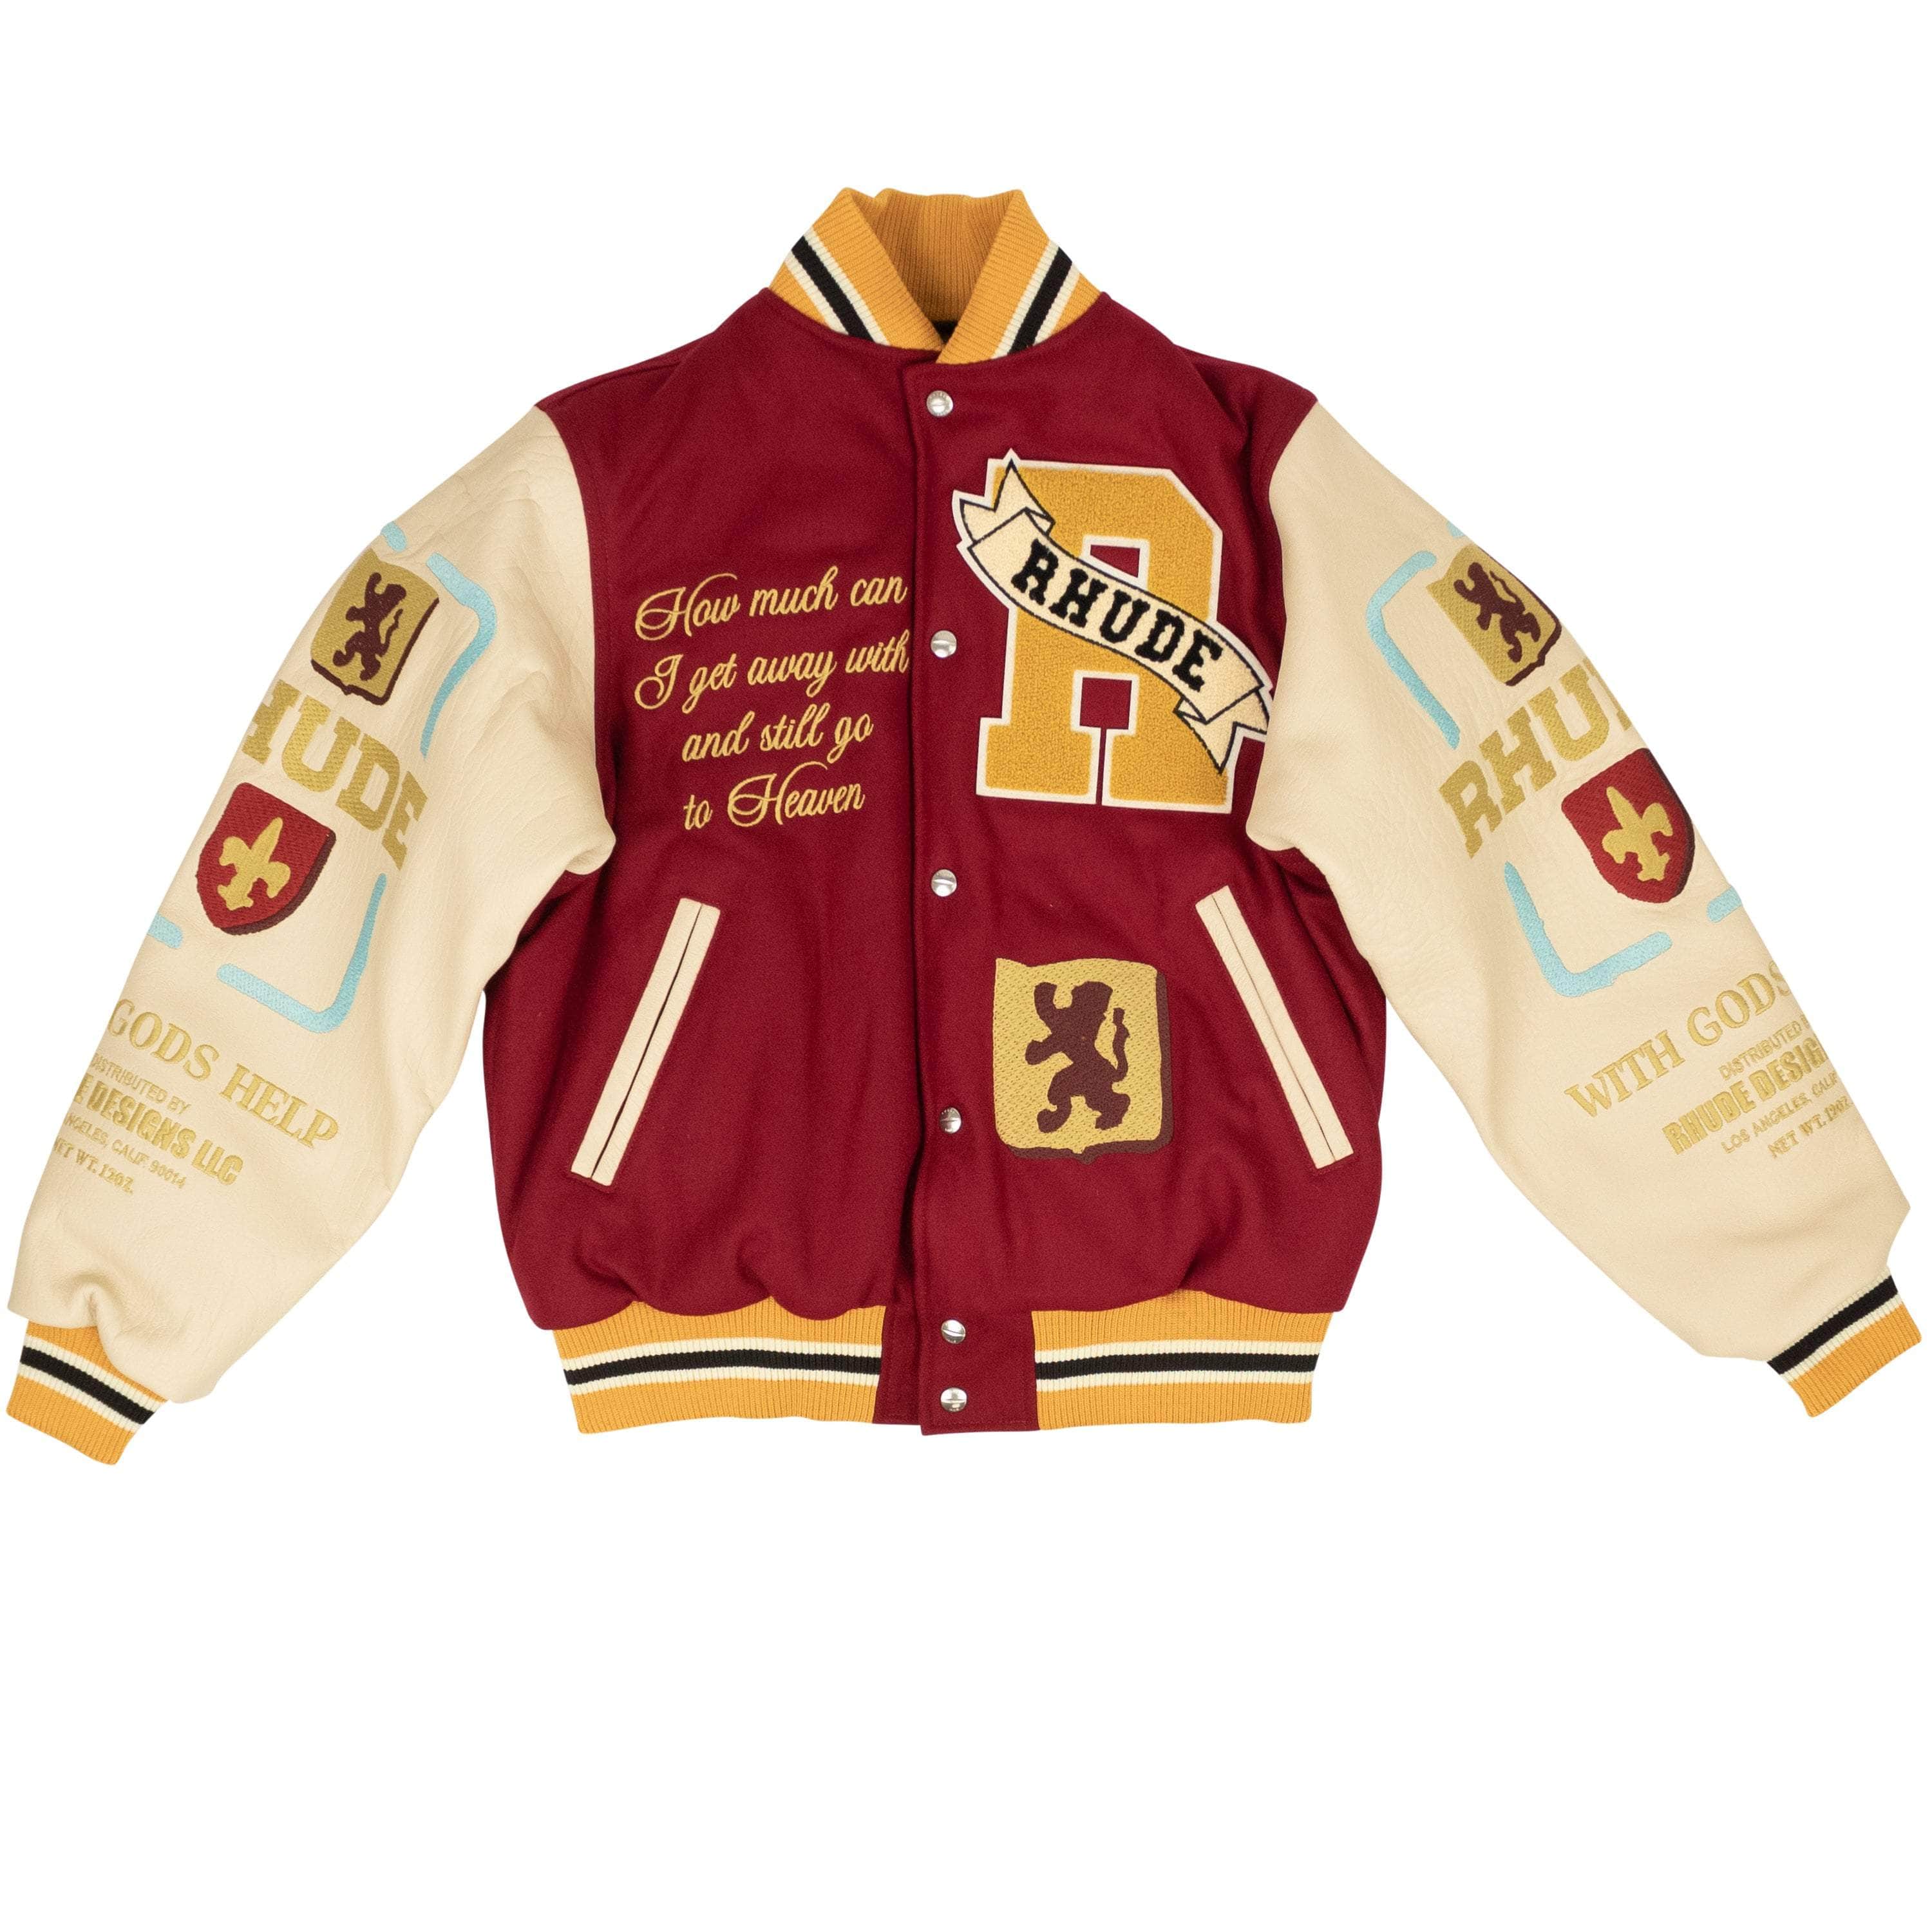 Rhude 1000-2000, channelenable-all, chicmi, couponcollection, gender-mens, main-clothing, mens-shoes, mens-varsity-jackets, rhude, size-l, size-m, size-xl, size-xxl Bordoux And Creme Le Valley Varsity Jacket